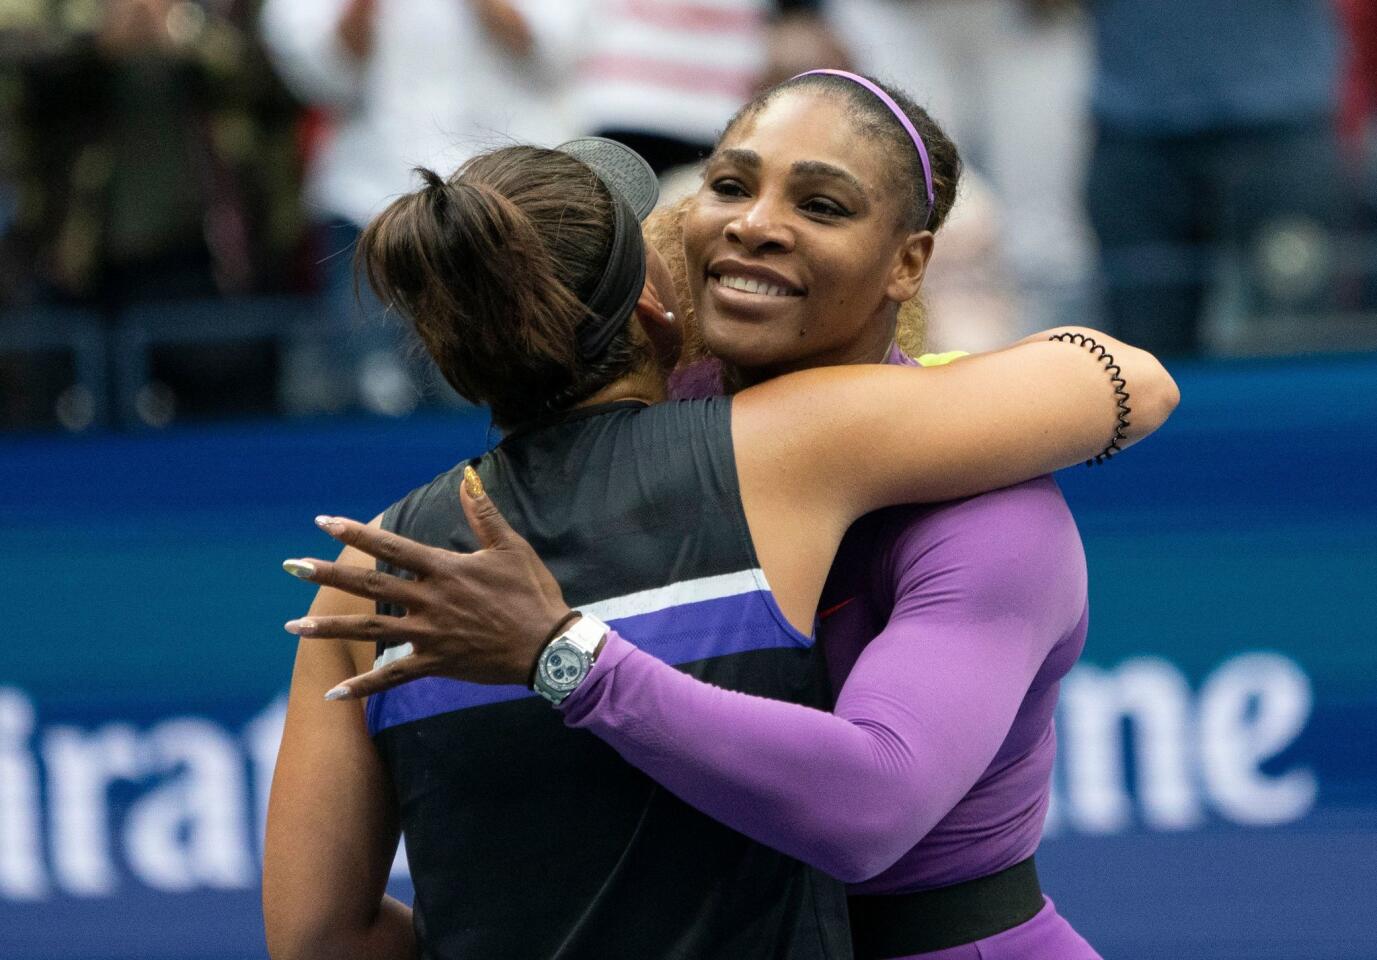 Bianca Andreescu, left, embraces Serena Williams after defeating her during the Women's Singles final match inside the Billie Jean King National Tennis Center on Sept. 7, 2019, in Queens.